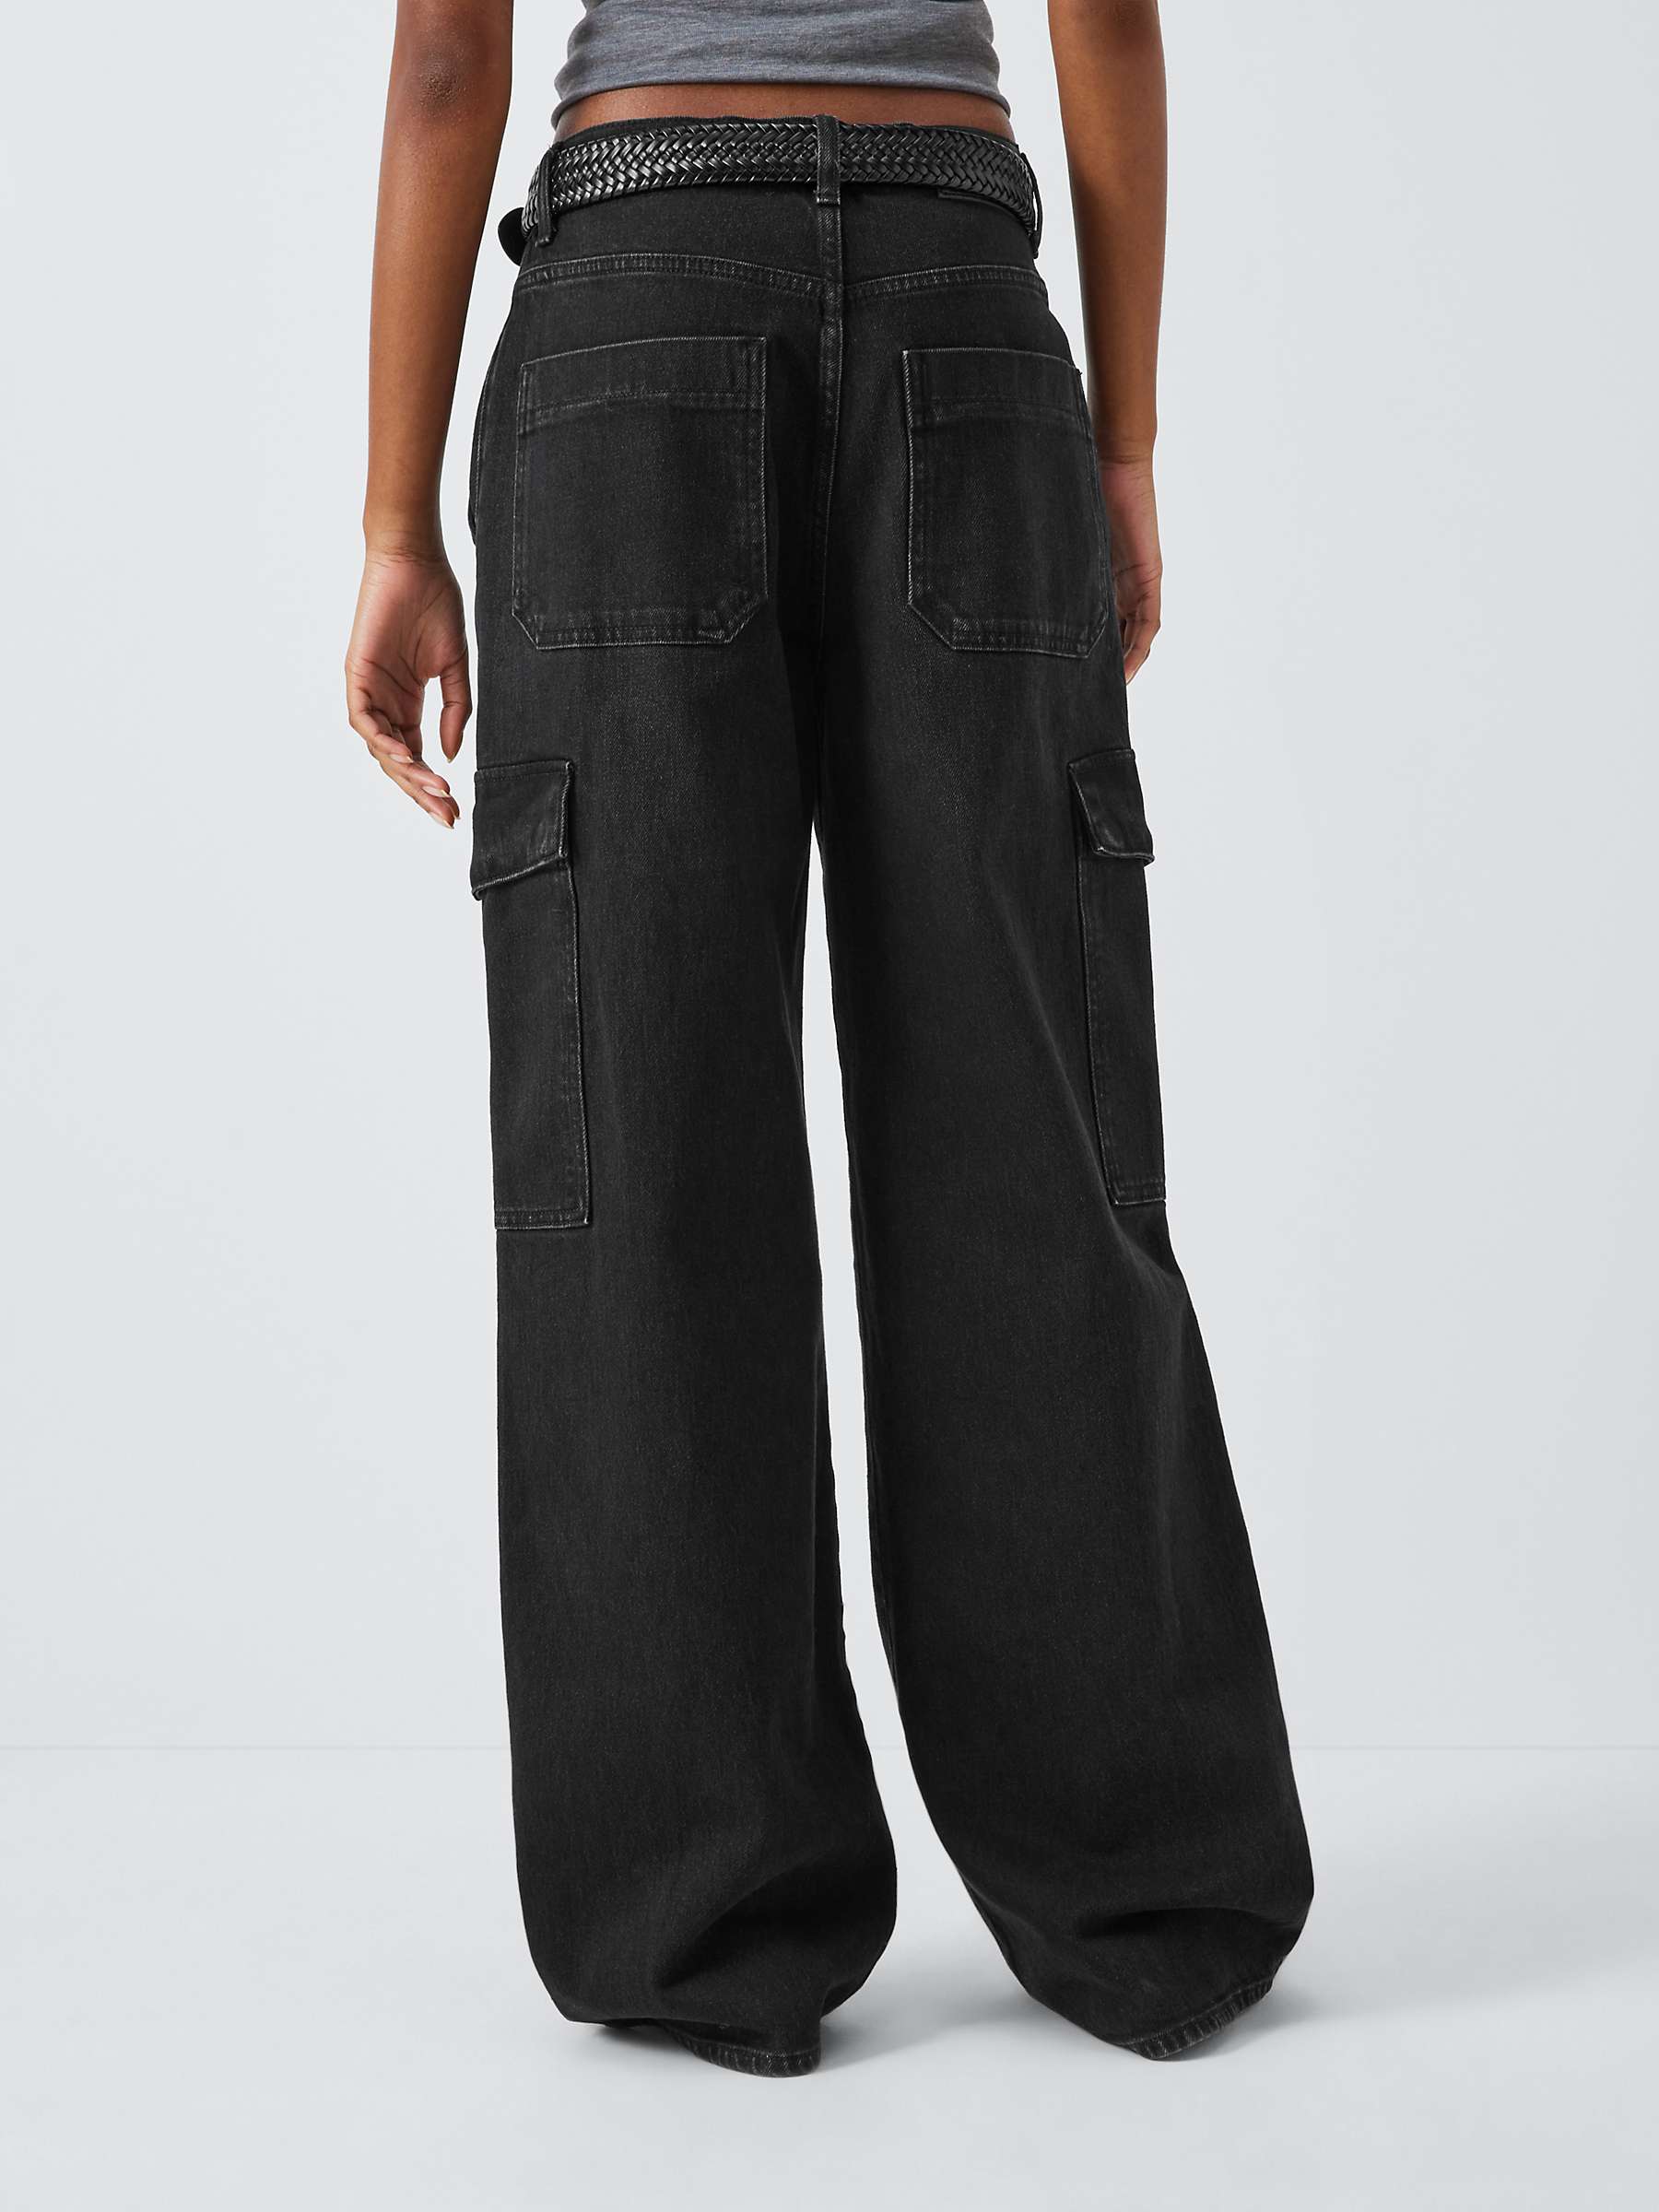 Buy 7 For All Mankind Cargo Scout Jeans, Global Online at johnlewis.com